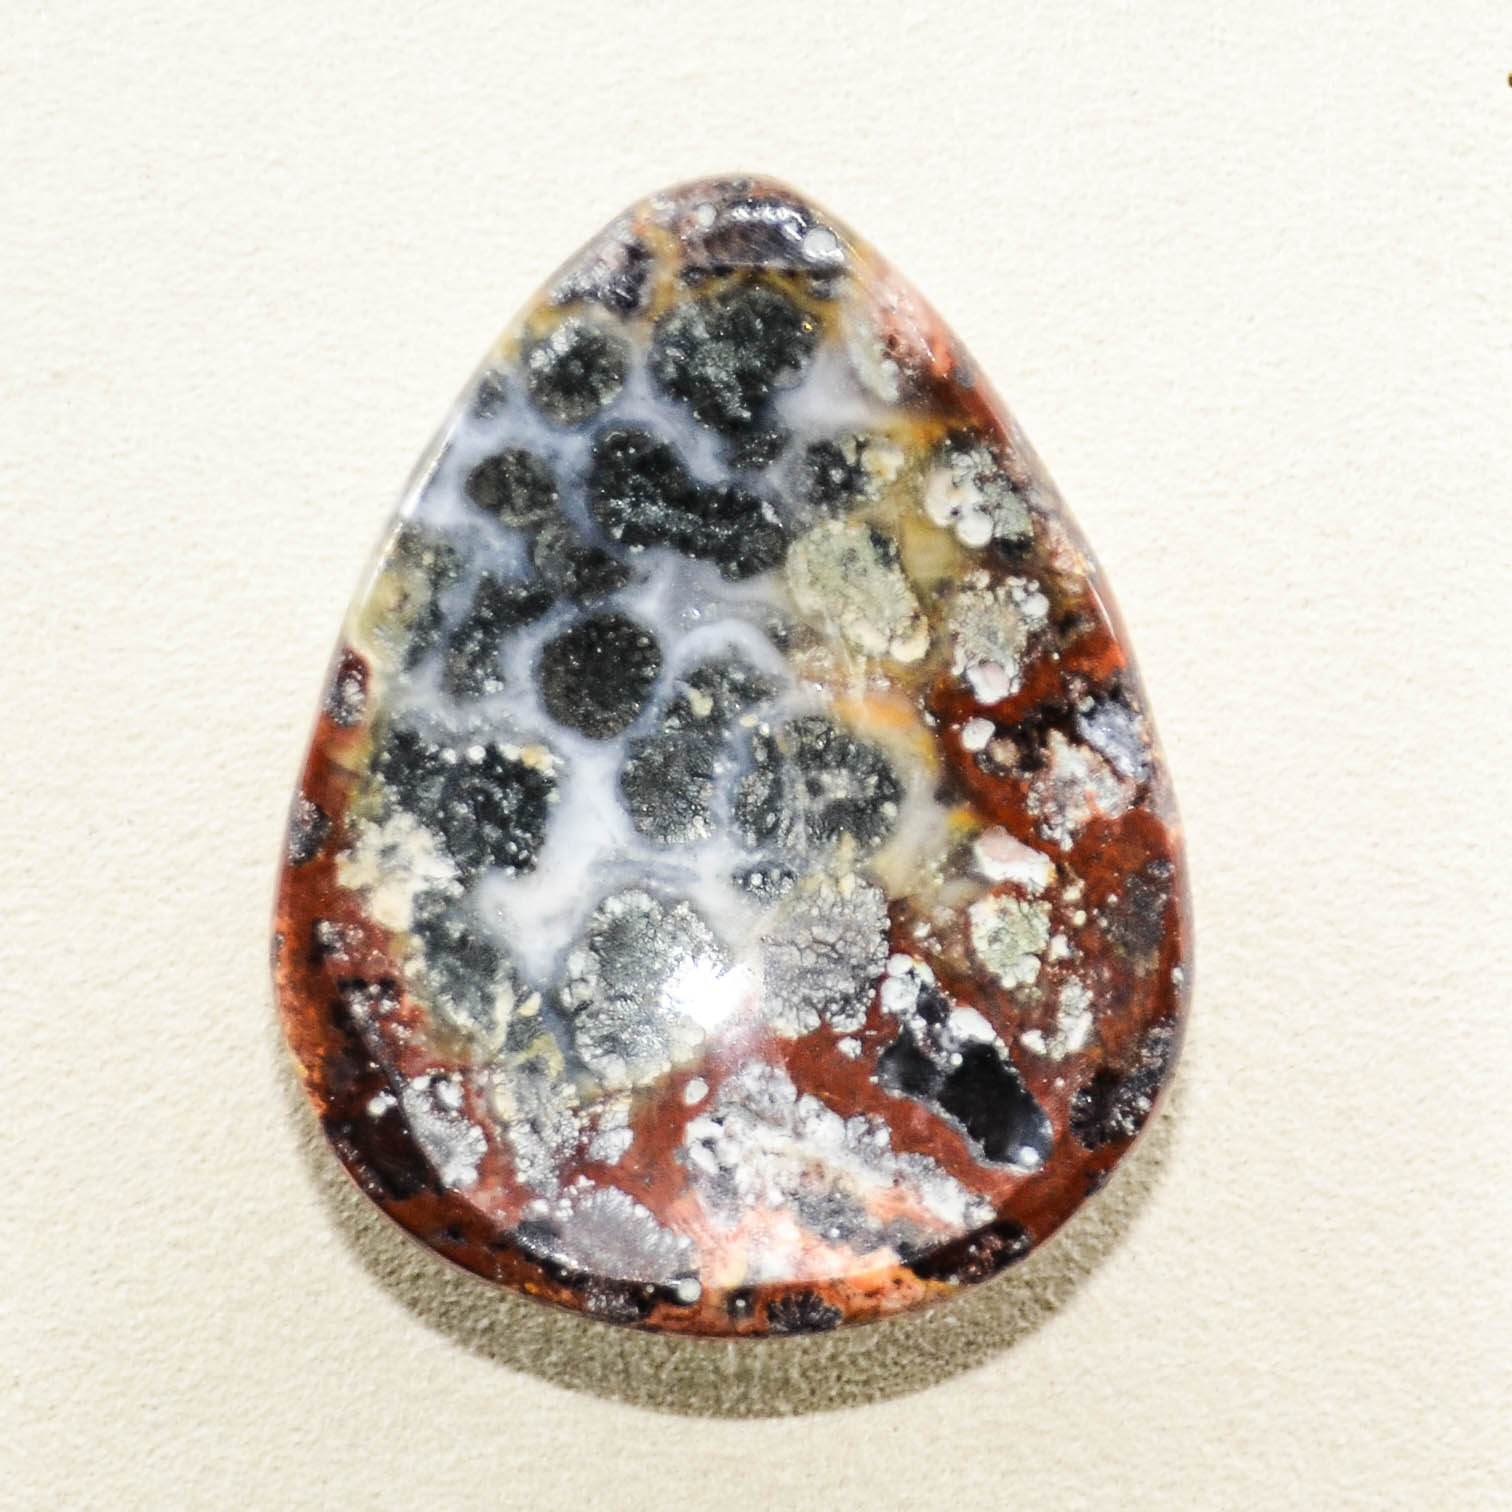 Polished Red Marcasite Worry Stone. Splashes of red, whites, and yellow. There are spots of grey throughout.